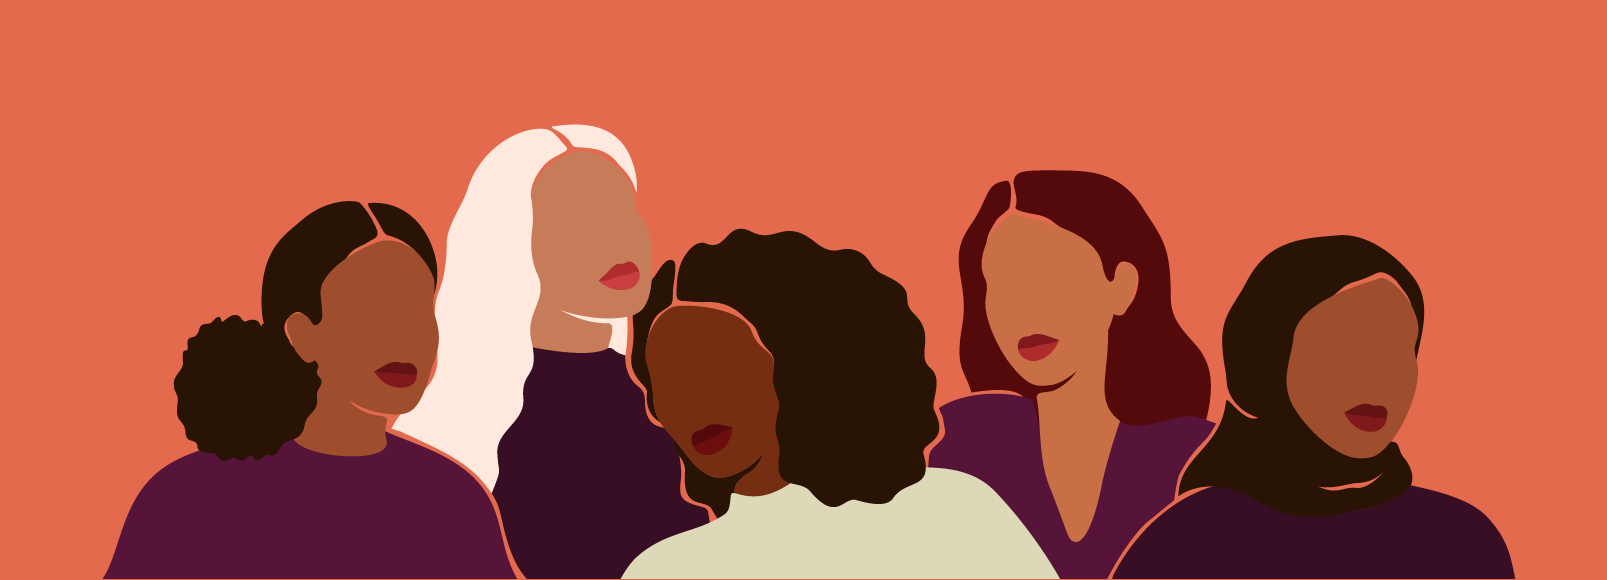 workplace-barriers-women-of-color-header